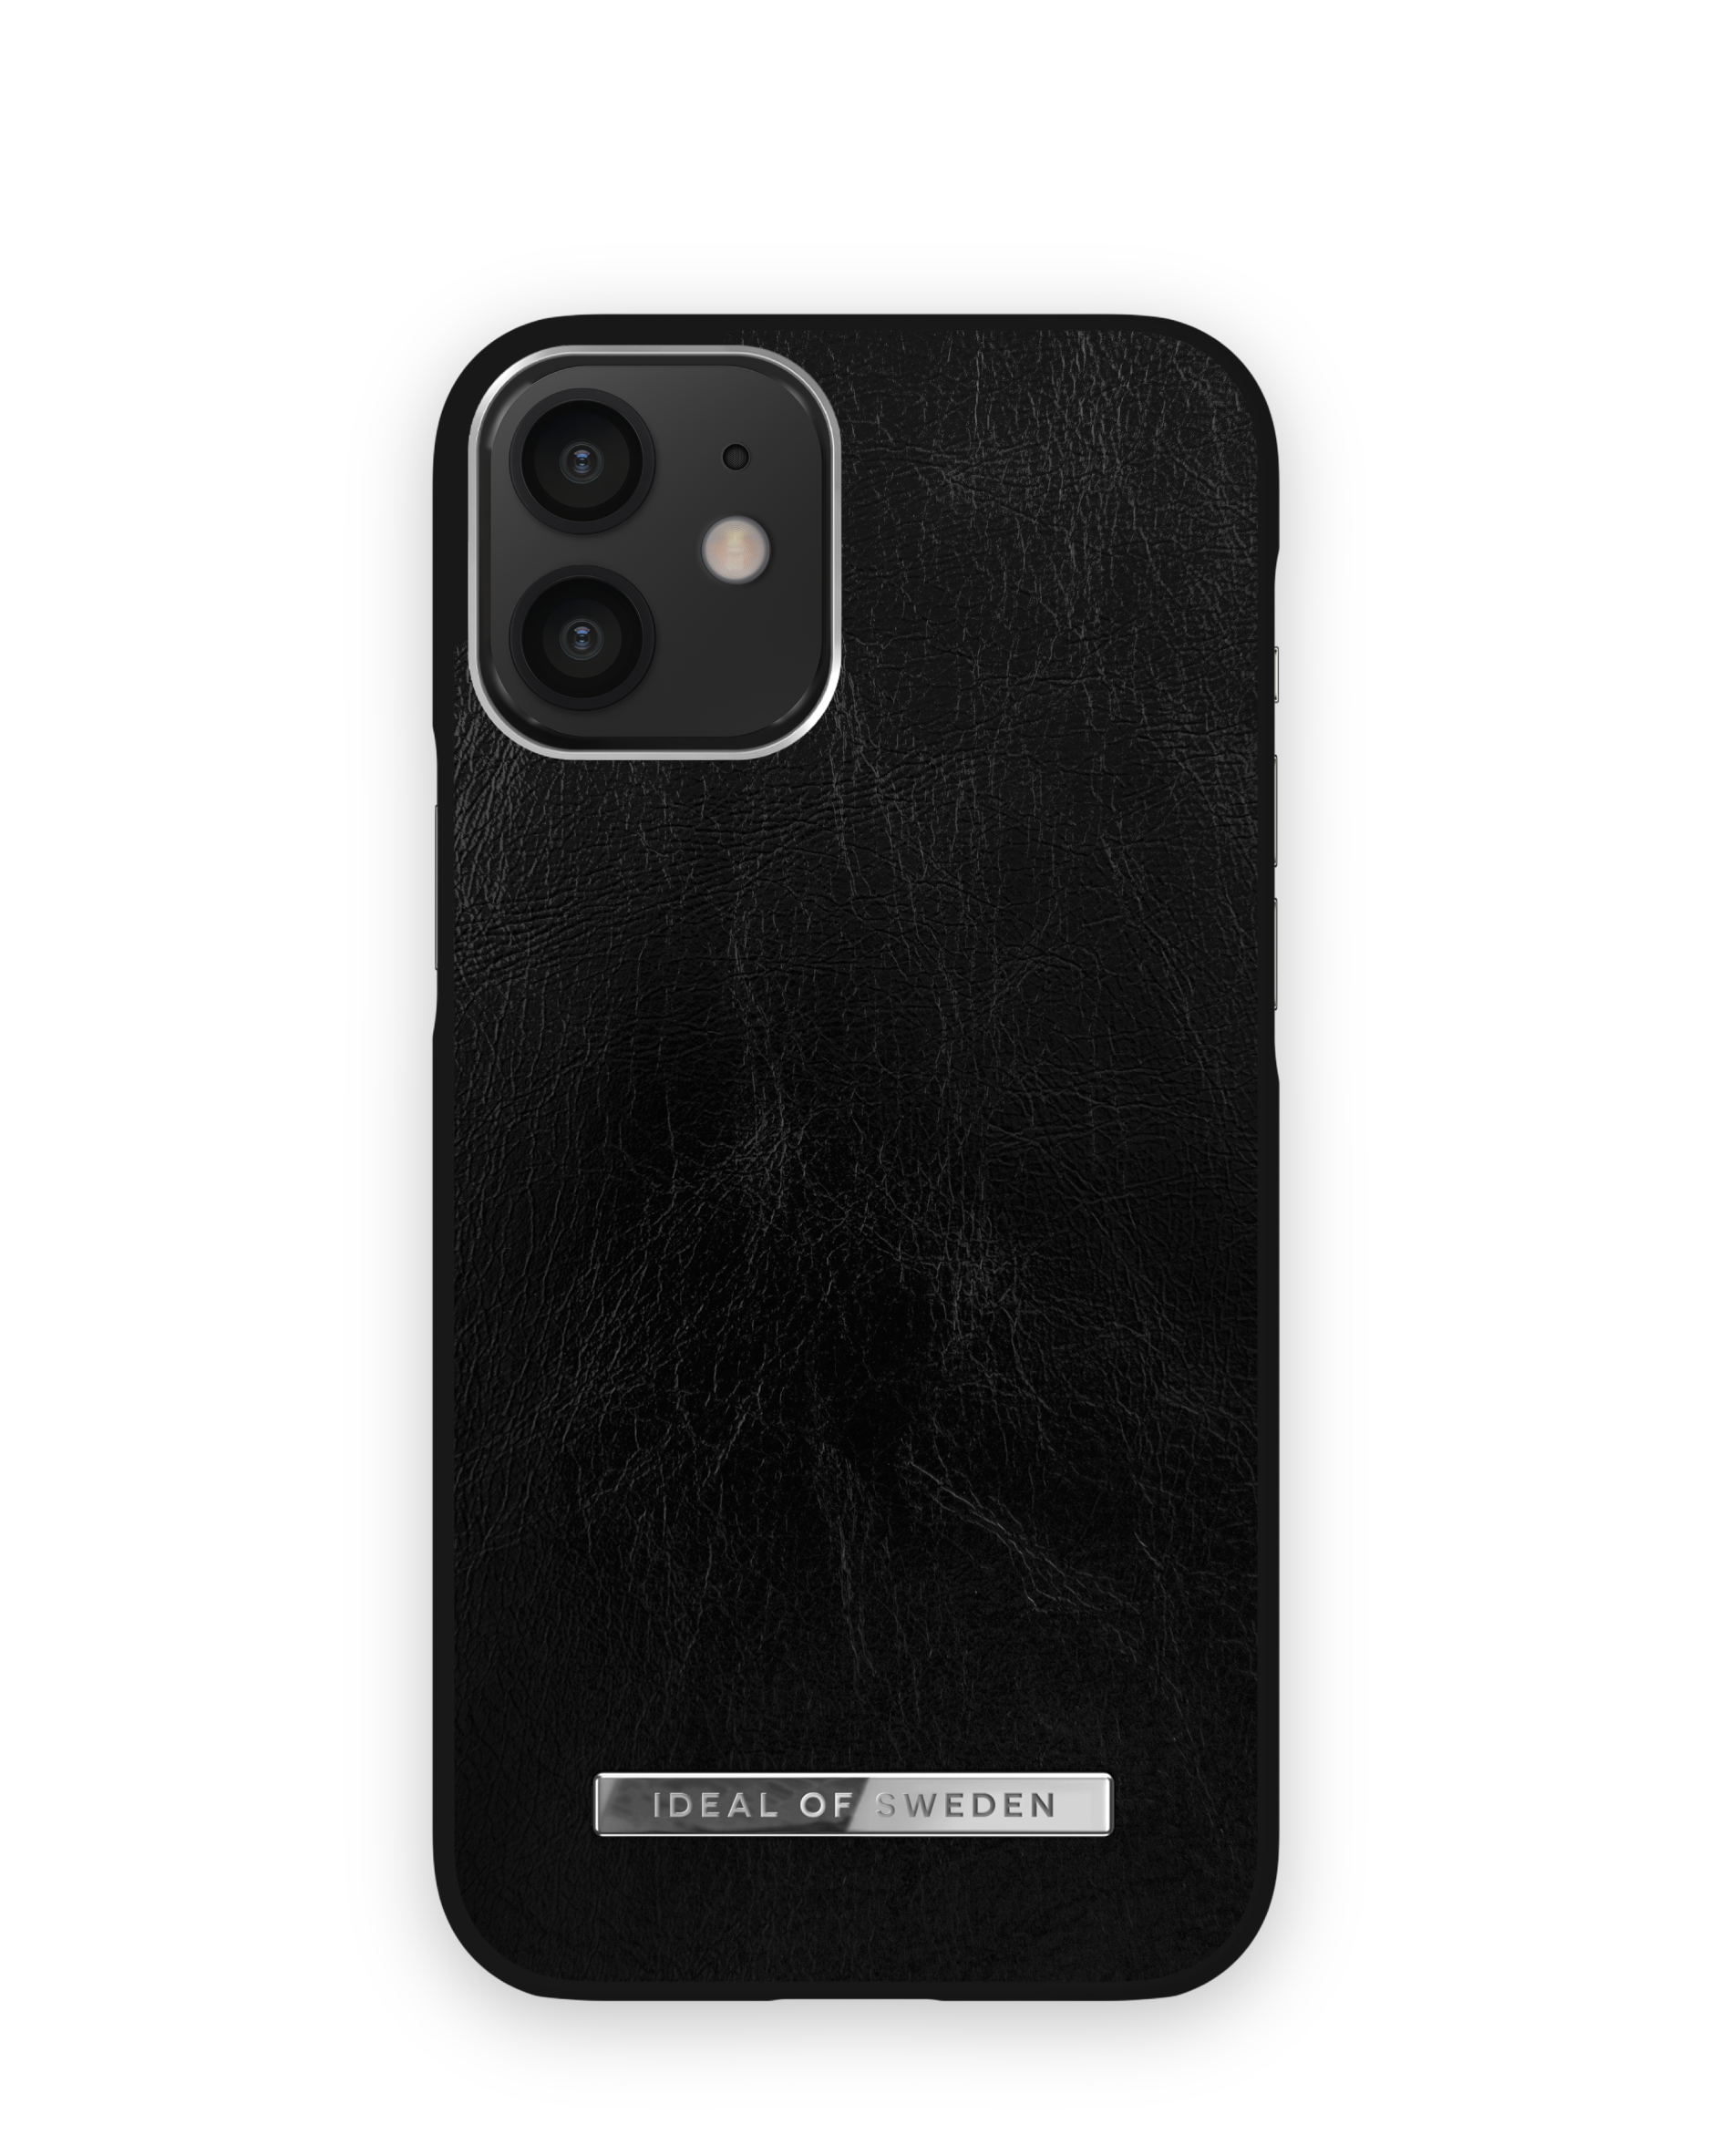 SWEDEN OF IPhone IDEAL 12 Glossy IDACSS21-I2054-311, Black mini, Apple, Silver Backcover,